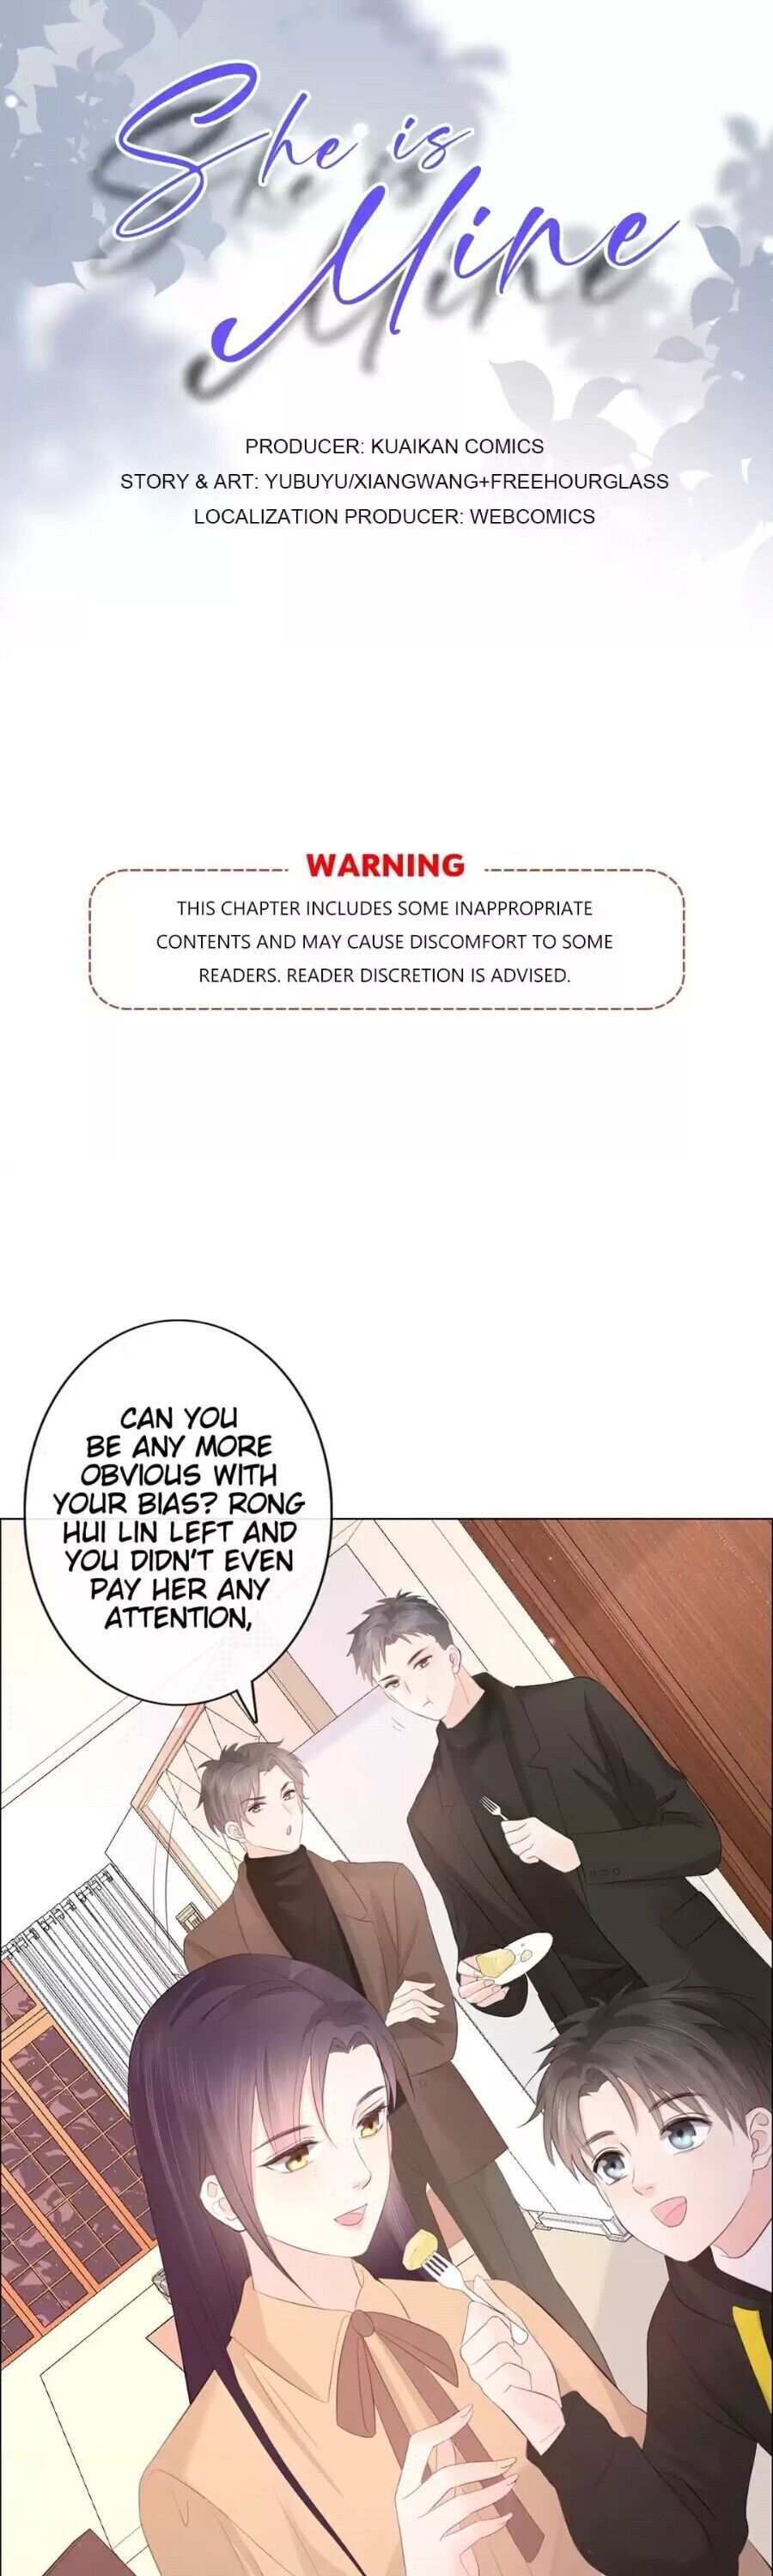 She is Mine [Manhua] Chapter 48 - Page 0